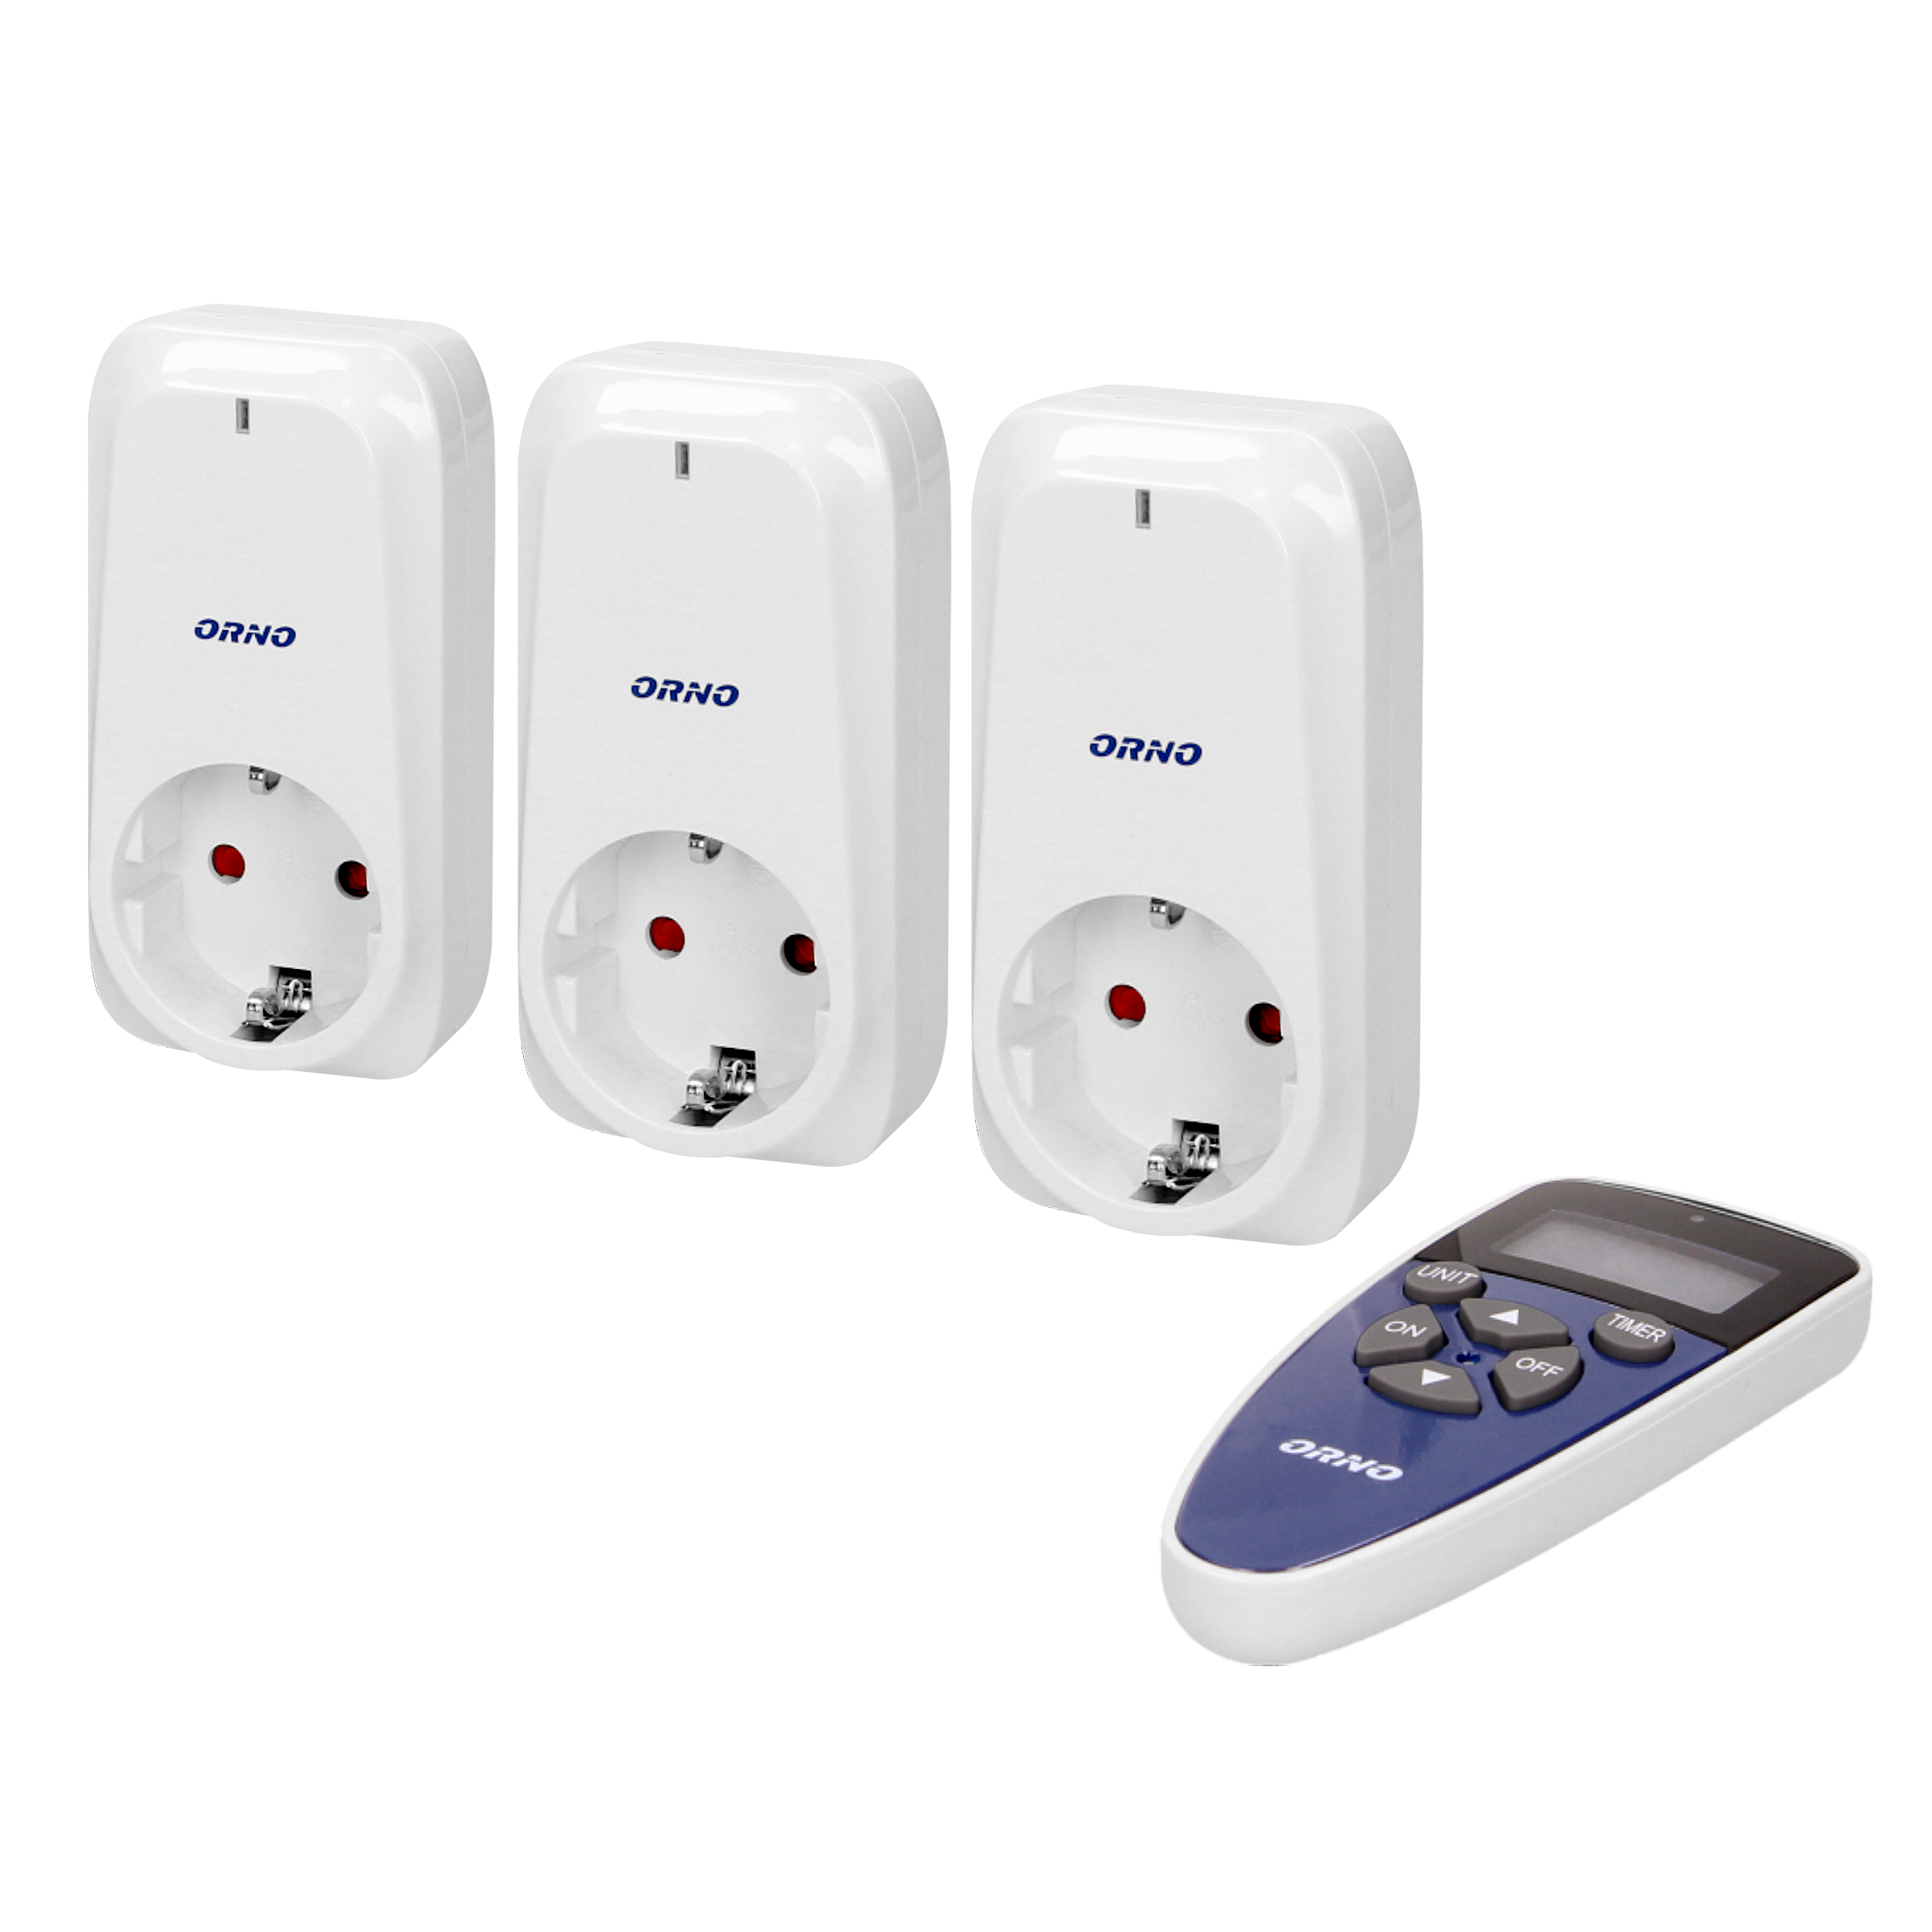 Set of wireless sockets with remote control and timer function, 3+1